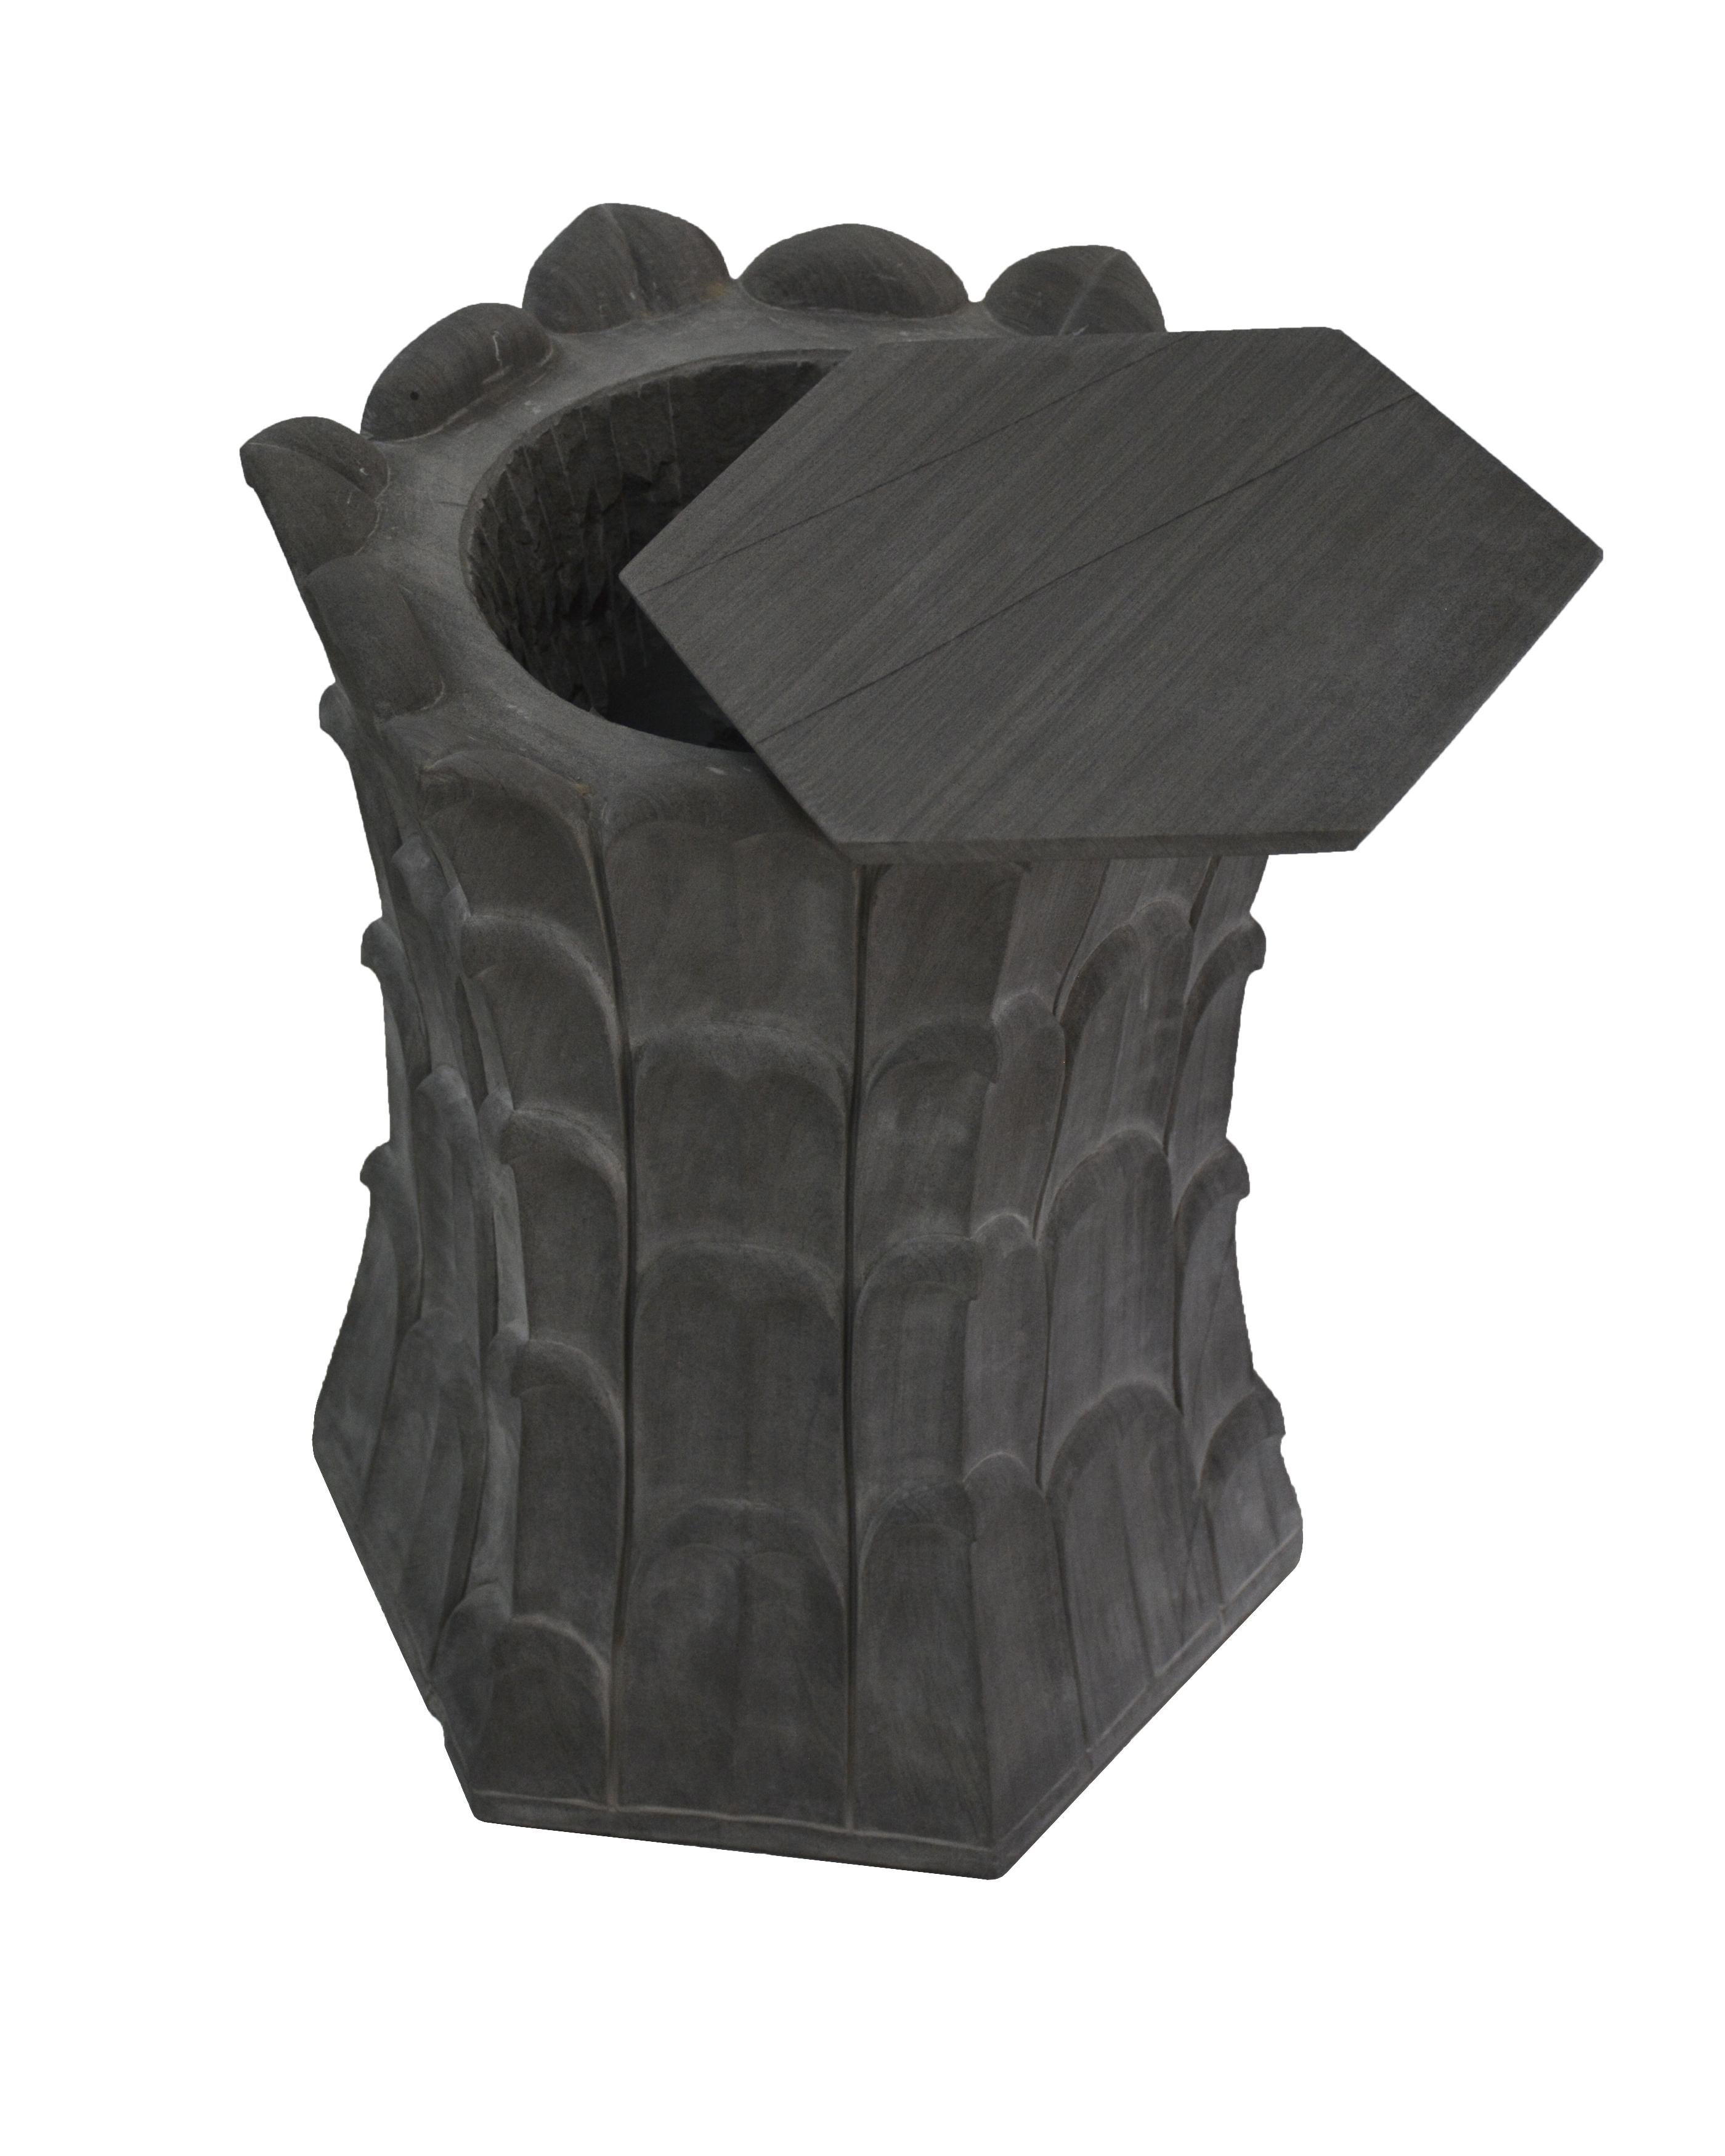 Inspired by the temple carvings in and around Udaipur, Stephanie Odegard designed this unique side table using locally available stones. The arrangement of the carved leaf motif gives the impression of a dense Bamboo Grove. The available options for